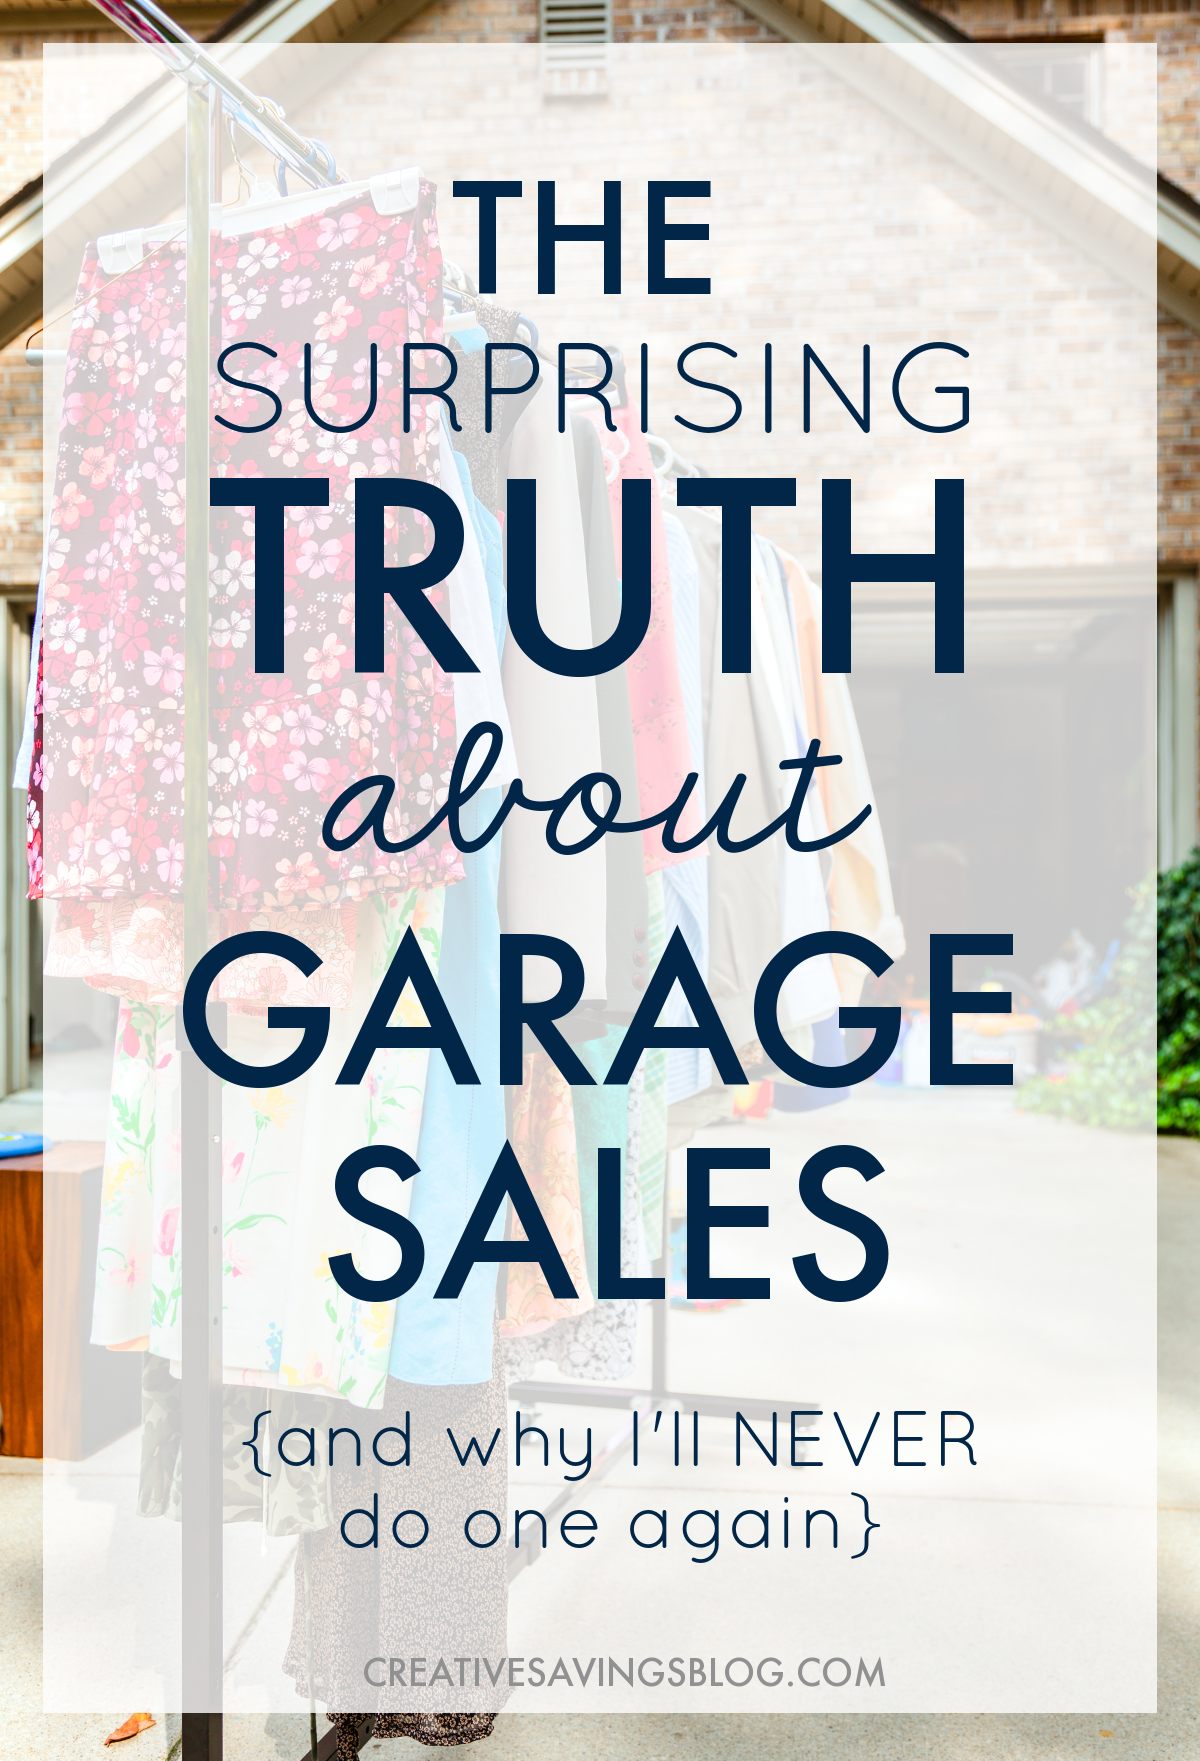 As I looked for garage sale ideas I came across this post that challenged me to wonder: Is It Worth It? I can't believe how much sense this makes! Work for several days preparing a sale, sit outside in the sun all day, force myself to talk awkwardly to random strangers, all for fifty bucks! Yeah, I'm going to take this girls #advice and #savetime. I'll just donate to charity instead. Bonus, I don't have to store #stuff any more while I wait for the next #garagesale. #garagesaleadvice